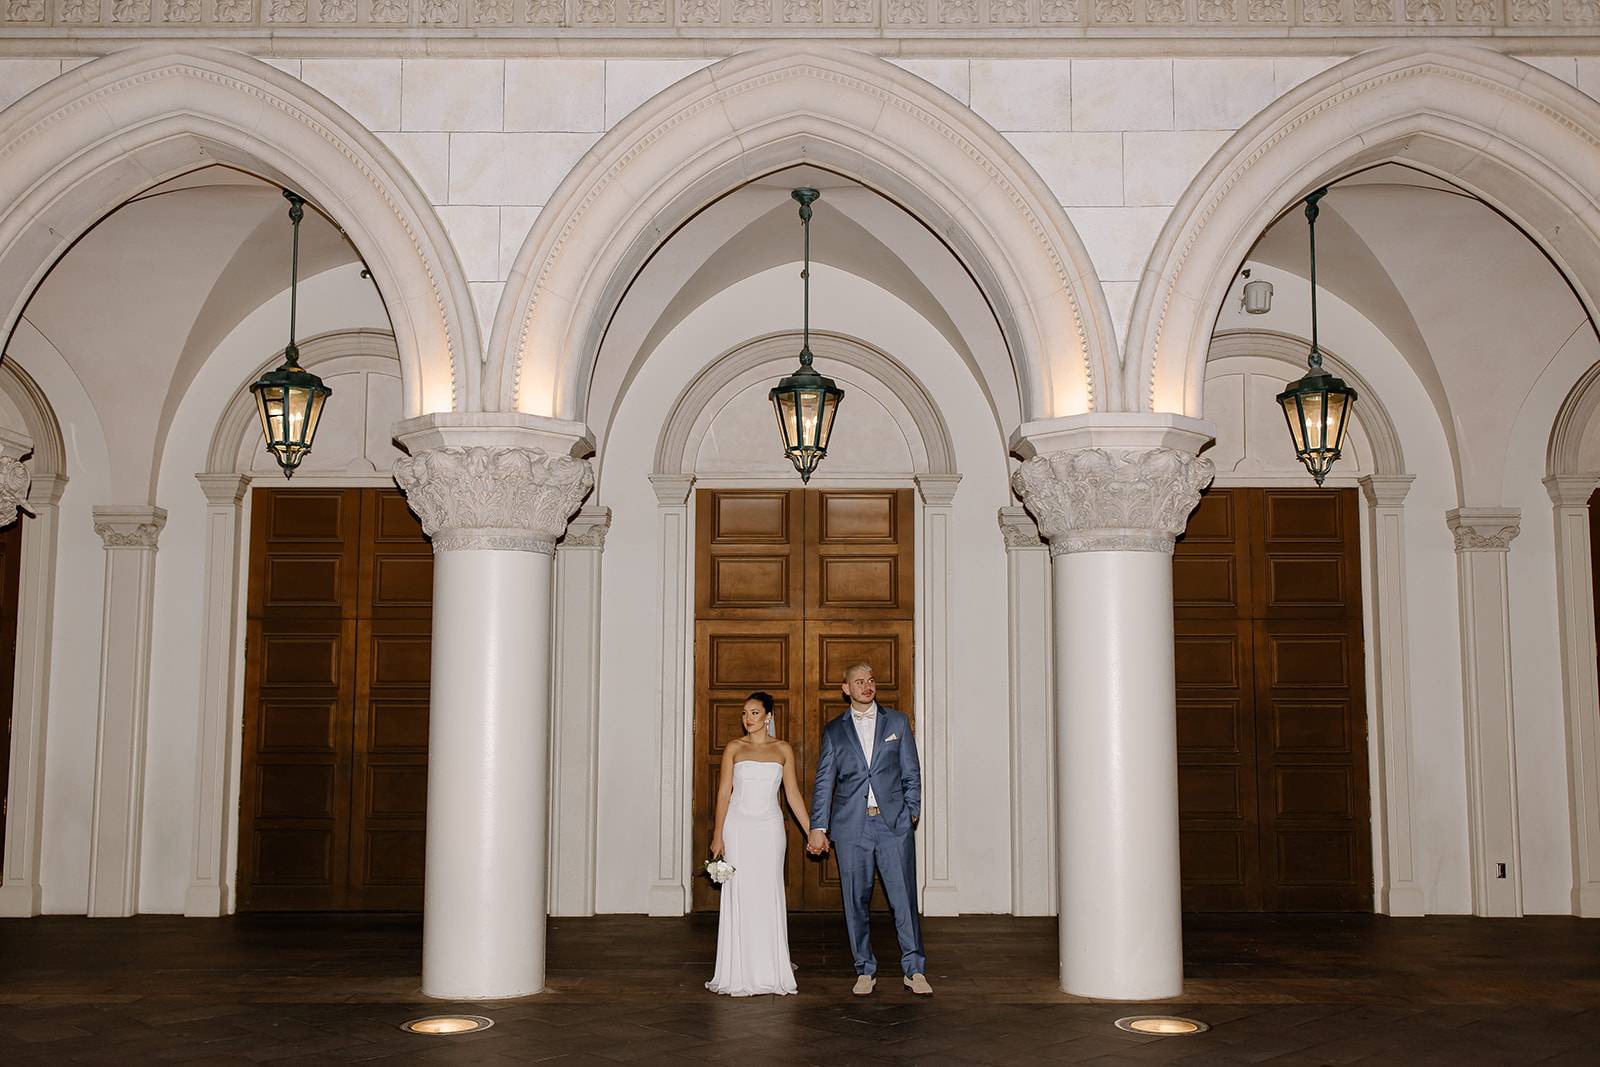 Bride and groom holding hands underneath pillar arches